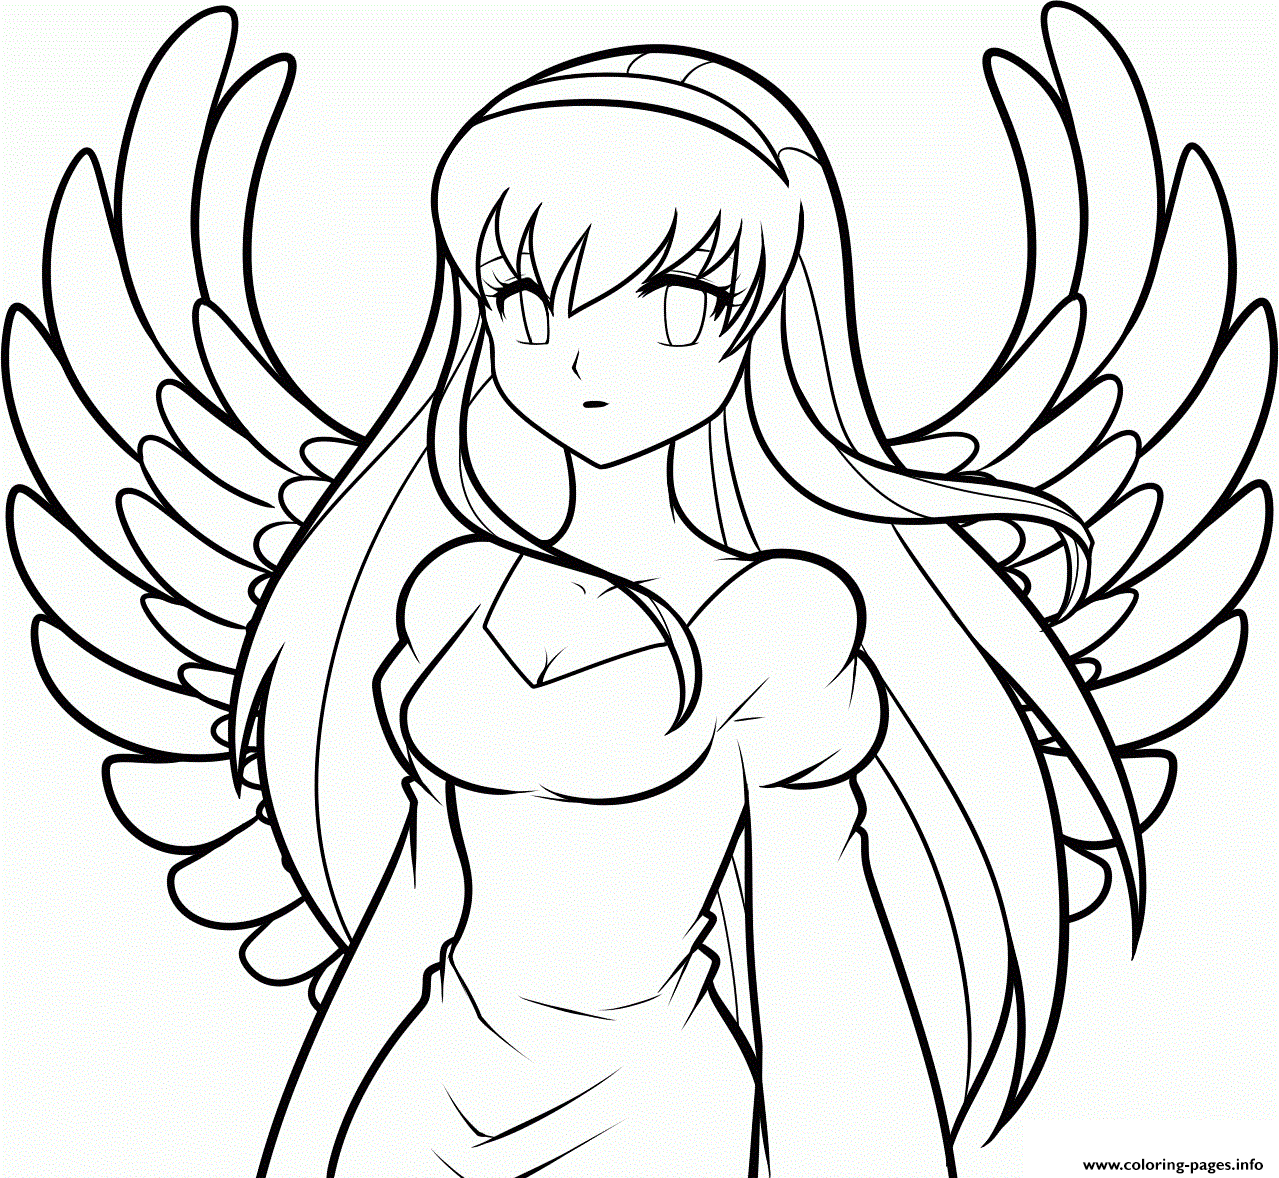 Easy Drawings To Draw Anime Angel Girl coloring